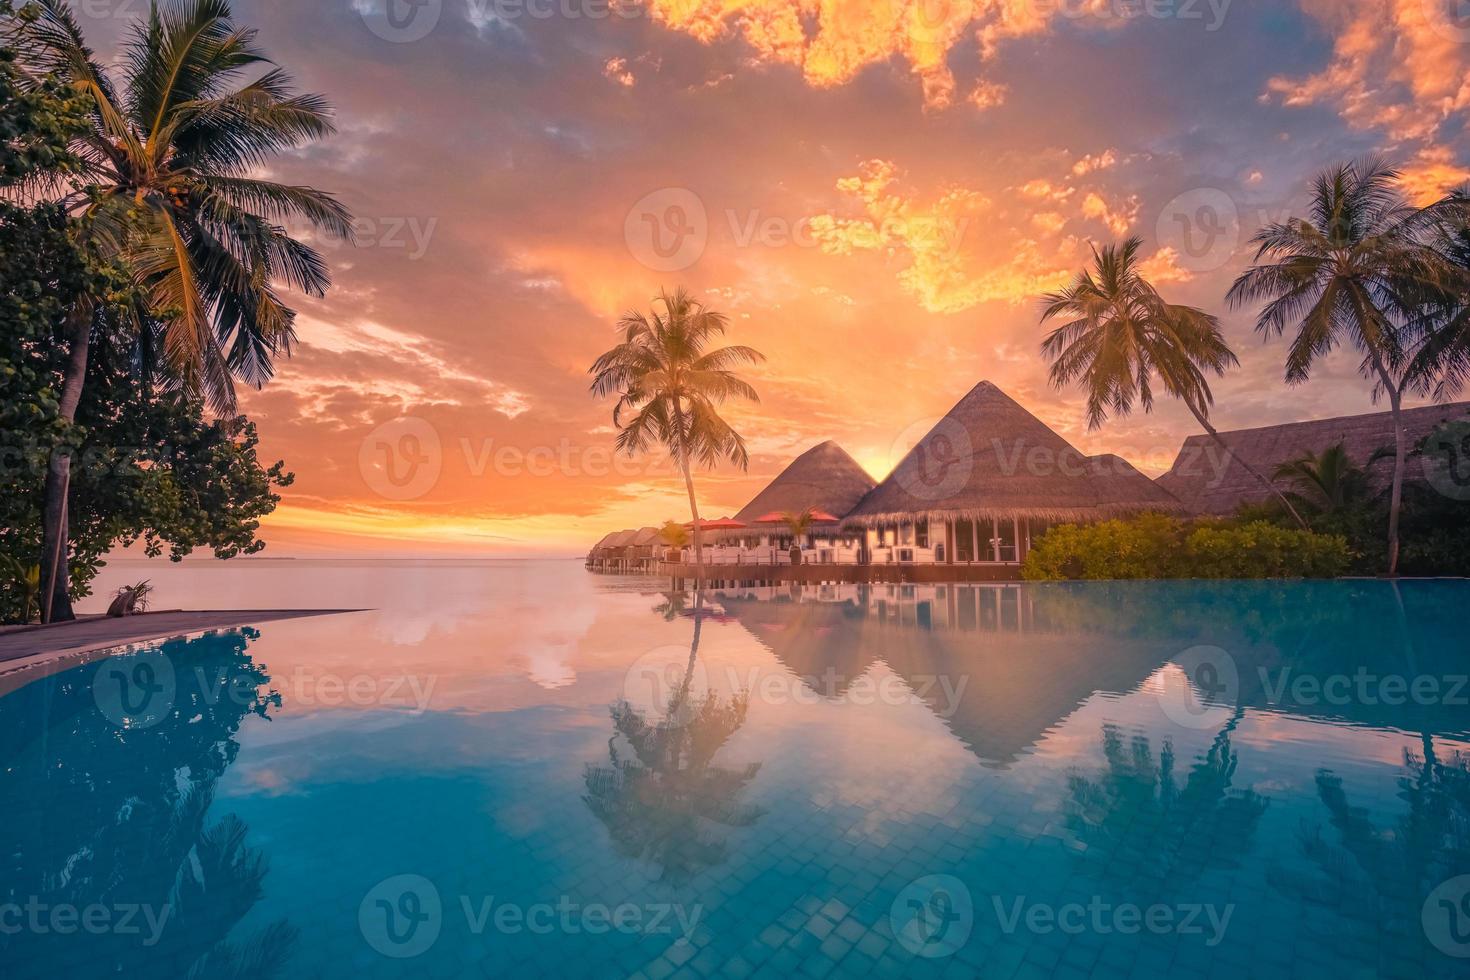 Outdoor tourism landscape. Luxury beach resort, infinity swimming pool and beach chairs loungers umbrellas with palm trees and sunset sea sky reflection. Summer island relax travel idyllic vacation photo